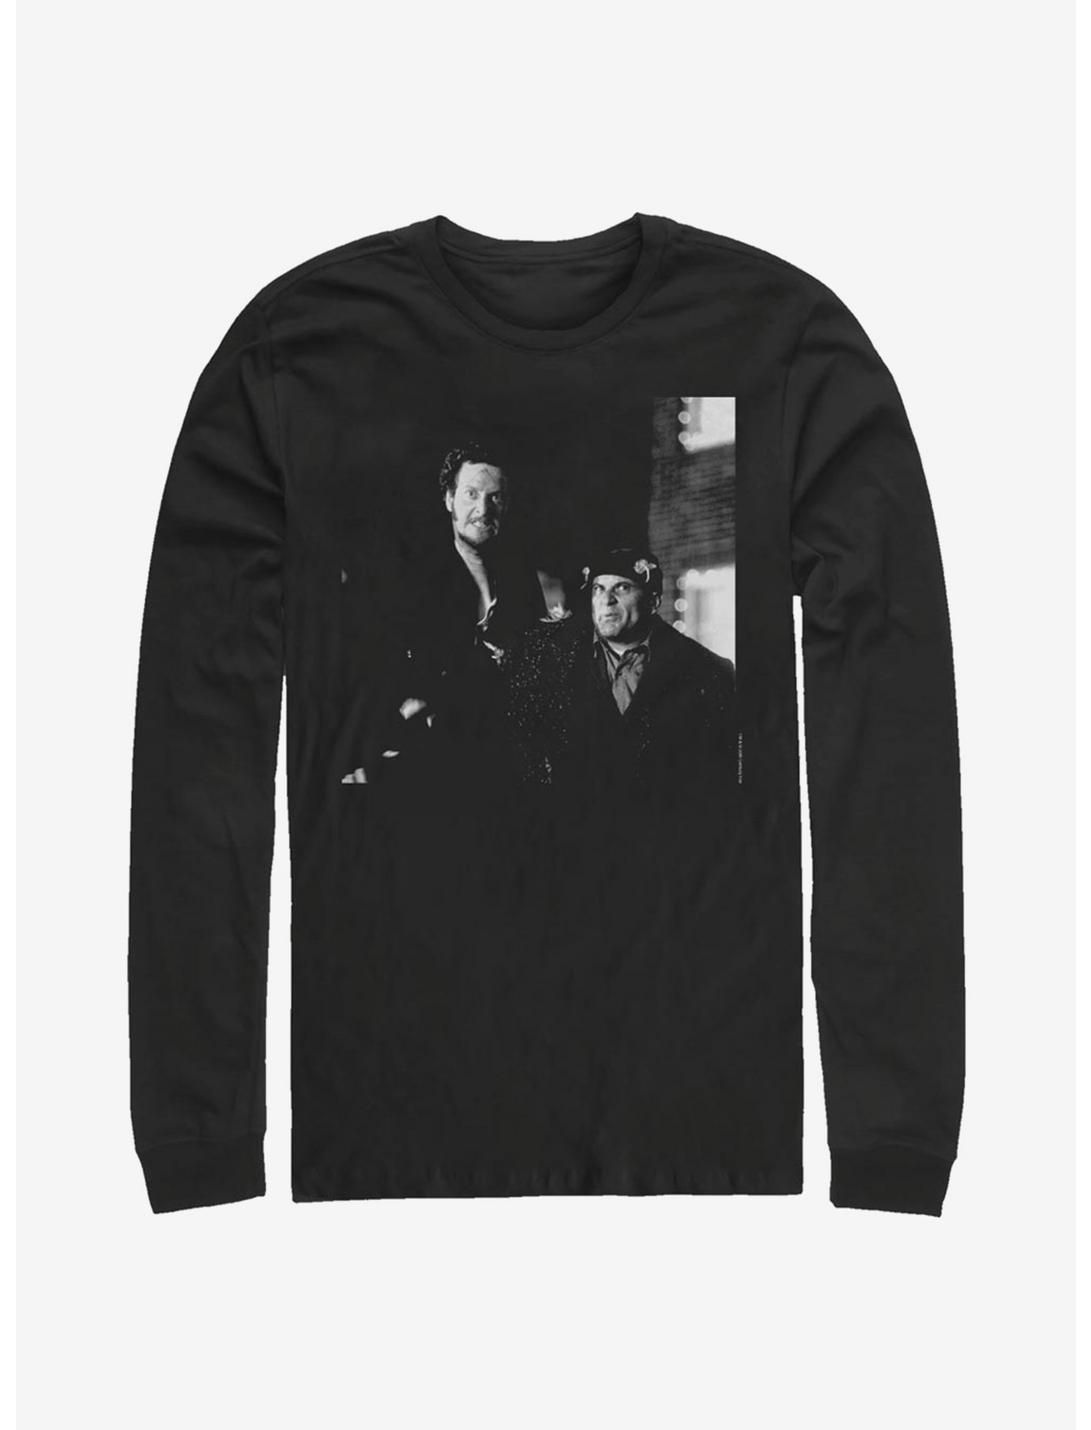 Home Alone Harry And Marv Photo Long-Sleeve T-Shirt, BLACK, hi-res